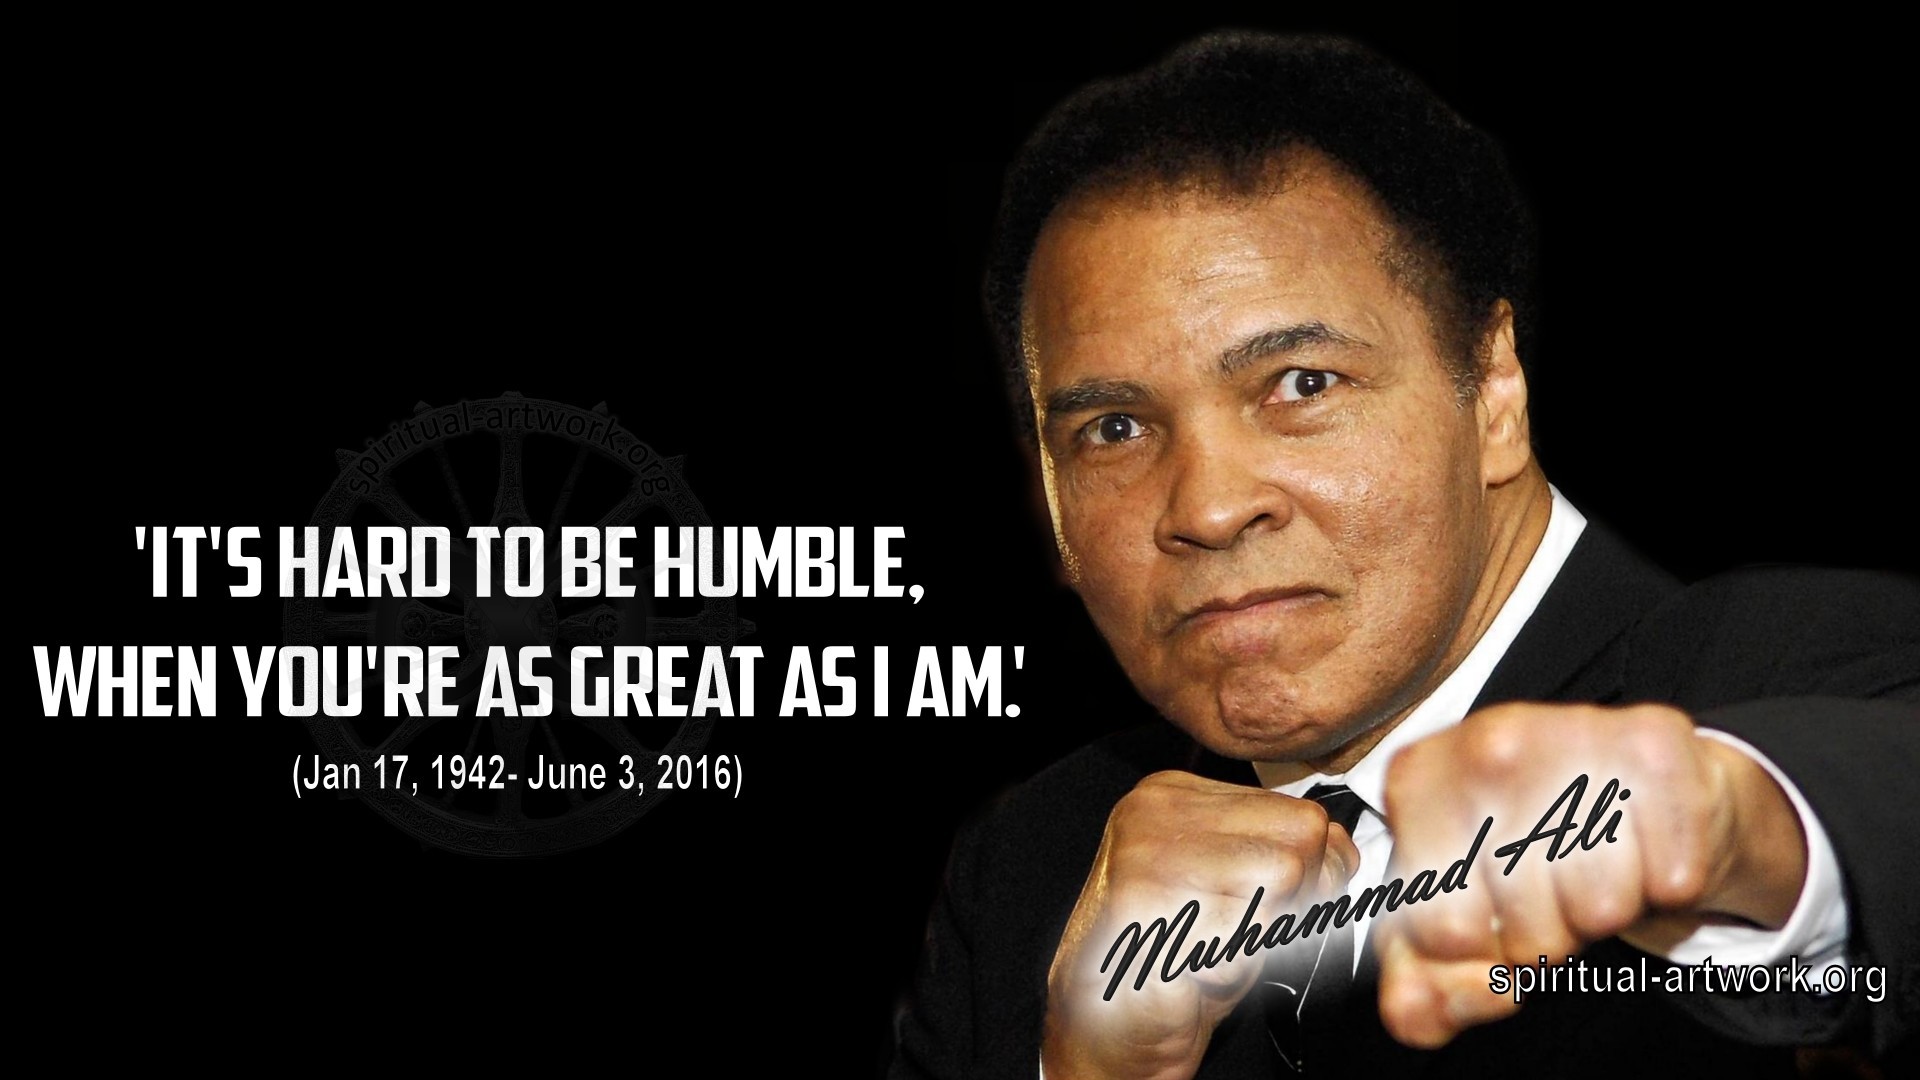 1920x1080  Muhammad Ali- Its Hard to be Humble when you're as great as